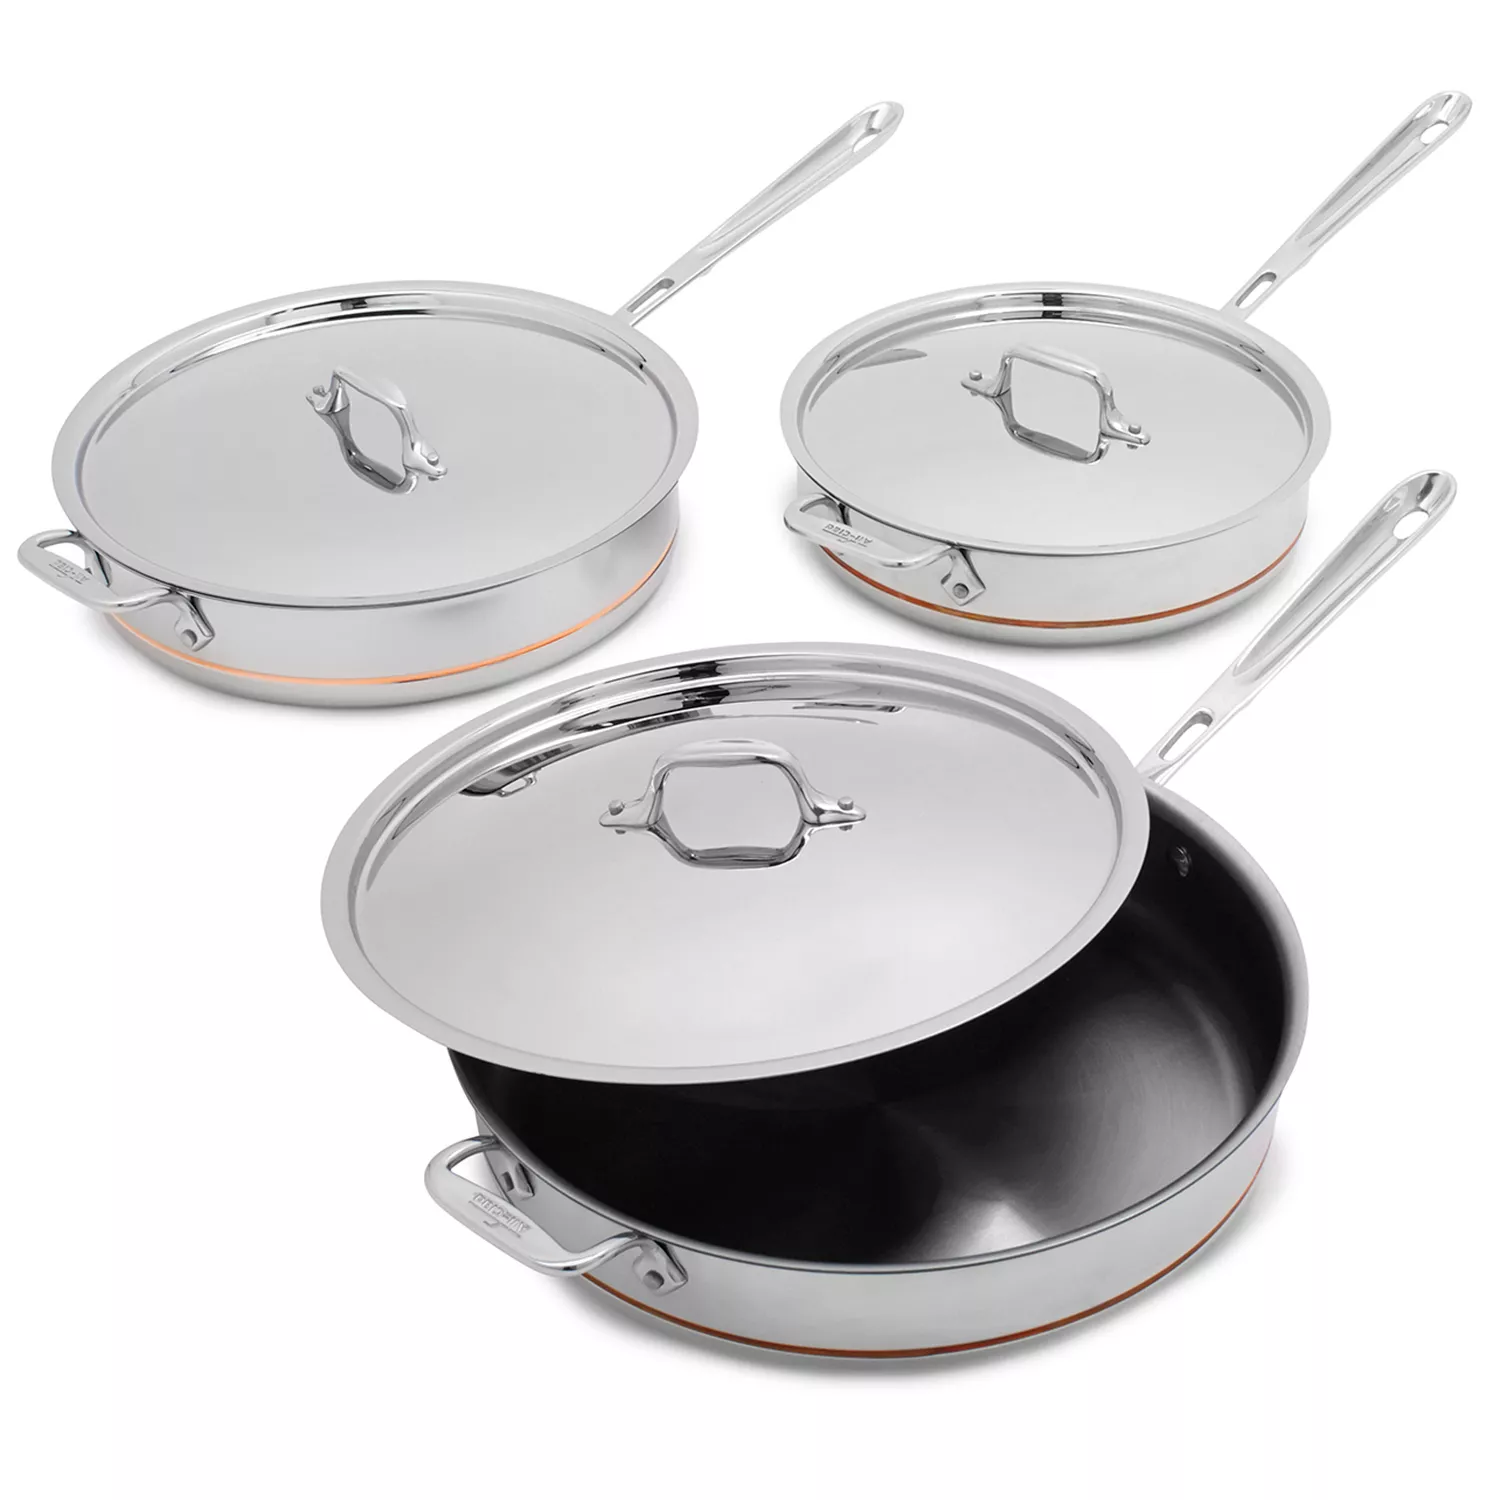 All-Clad 4-Qt. Copper Core 5-Ply All-In-One Pan with Lid